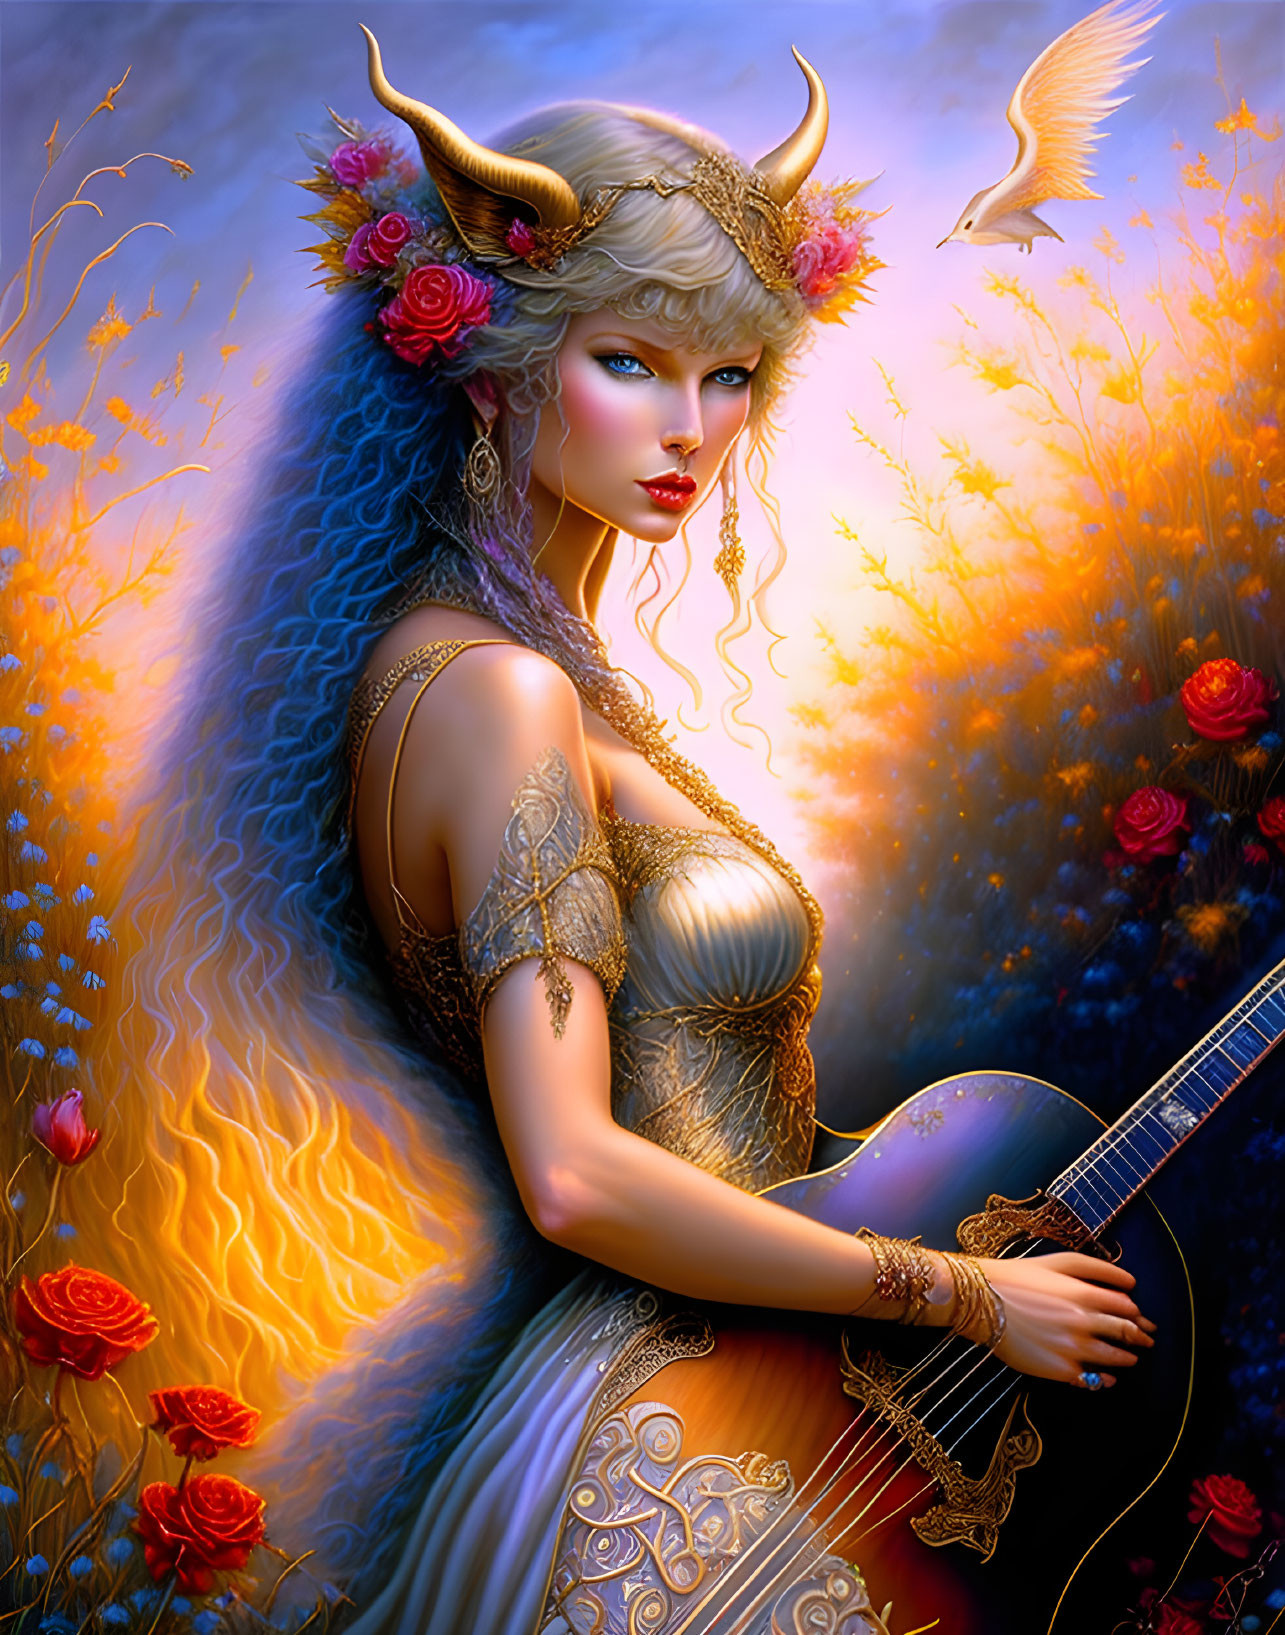 Fantasy illustration of horned woman with lute in golden light and roses.